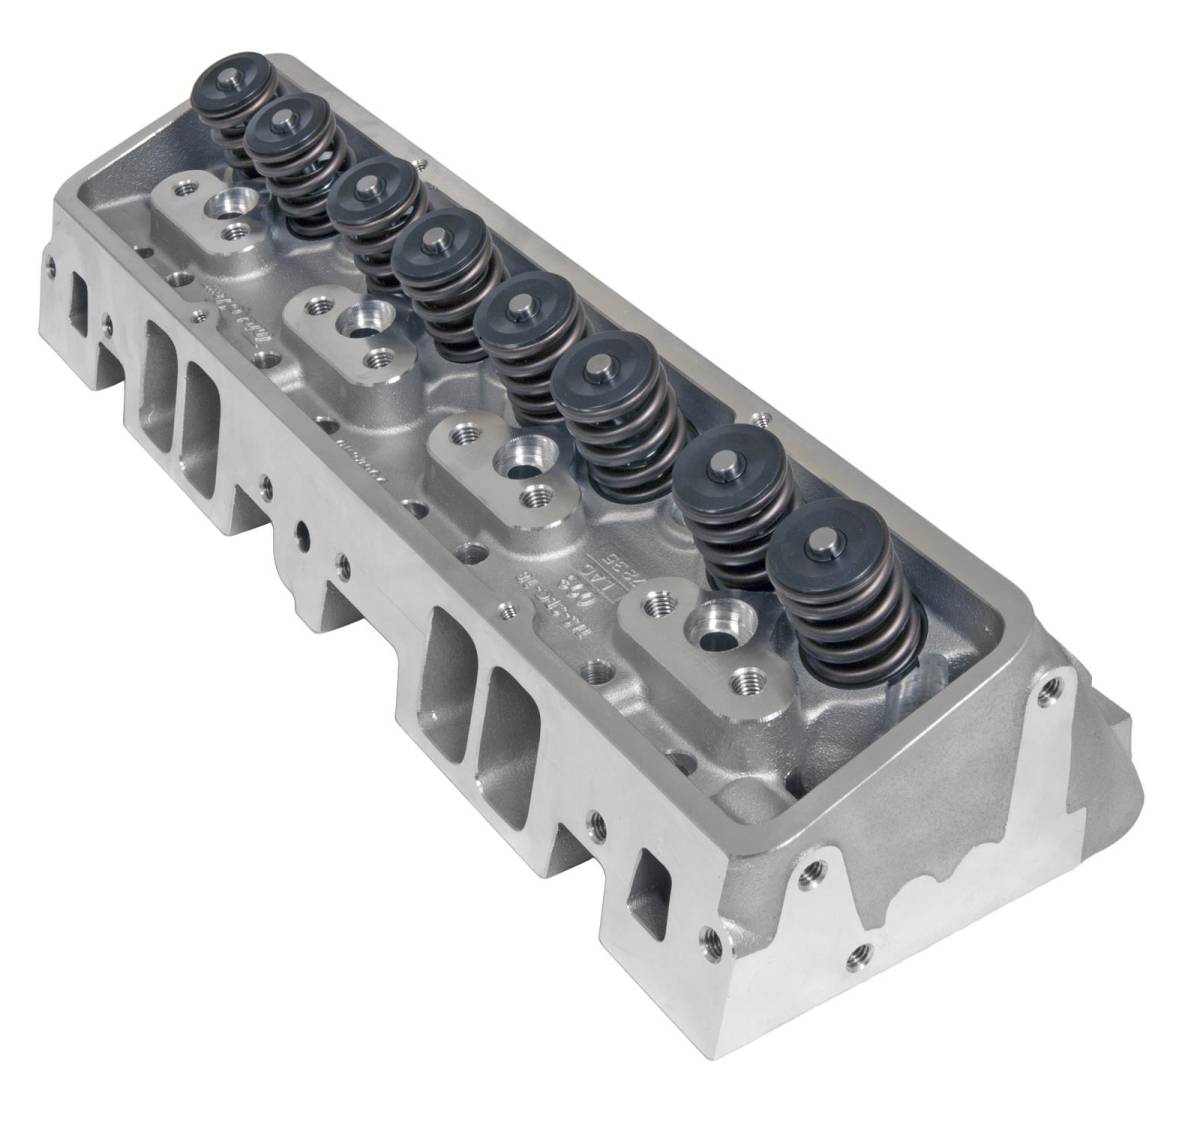 Trickflow - Trick Flow DHC SBC 175cc Aluminum Cylinder Head for Small Block Chevrolet - With Accessory Bolt Holes - Image 1